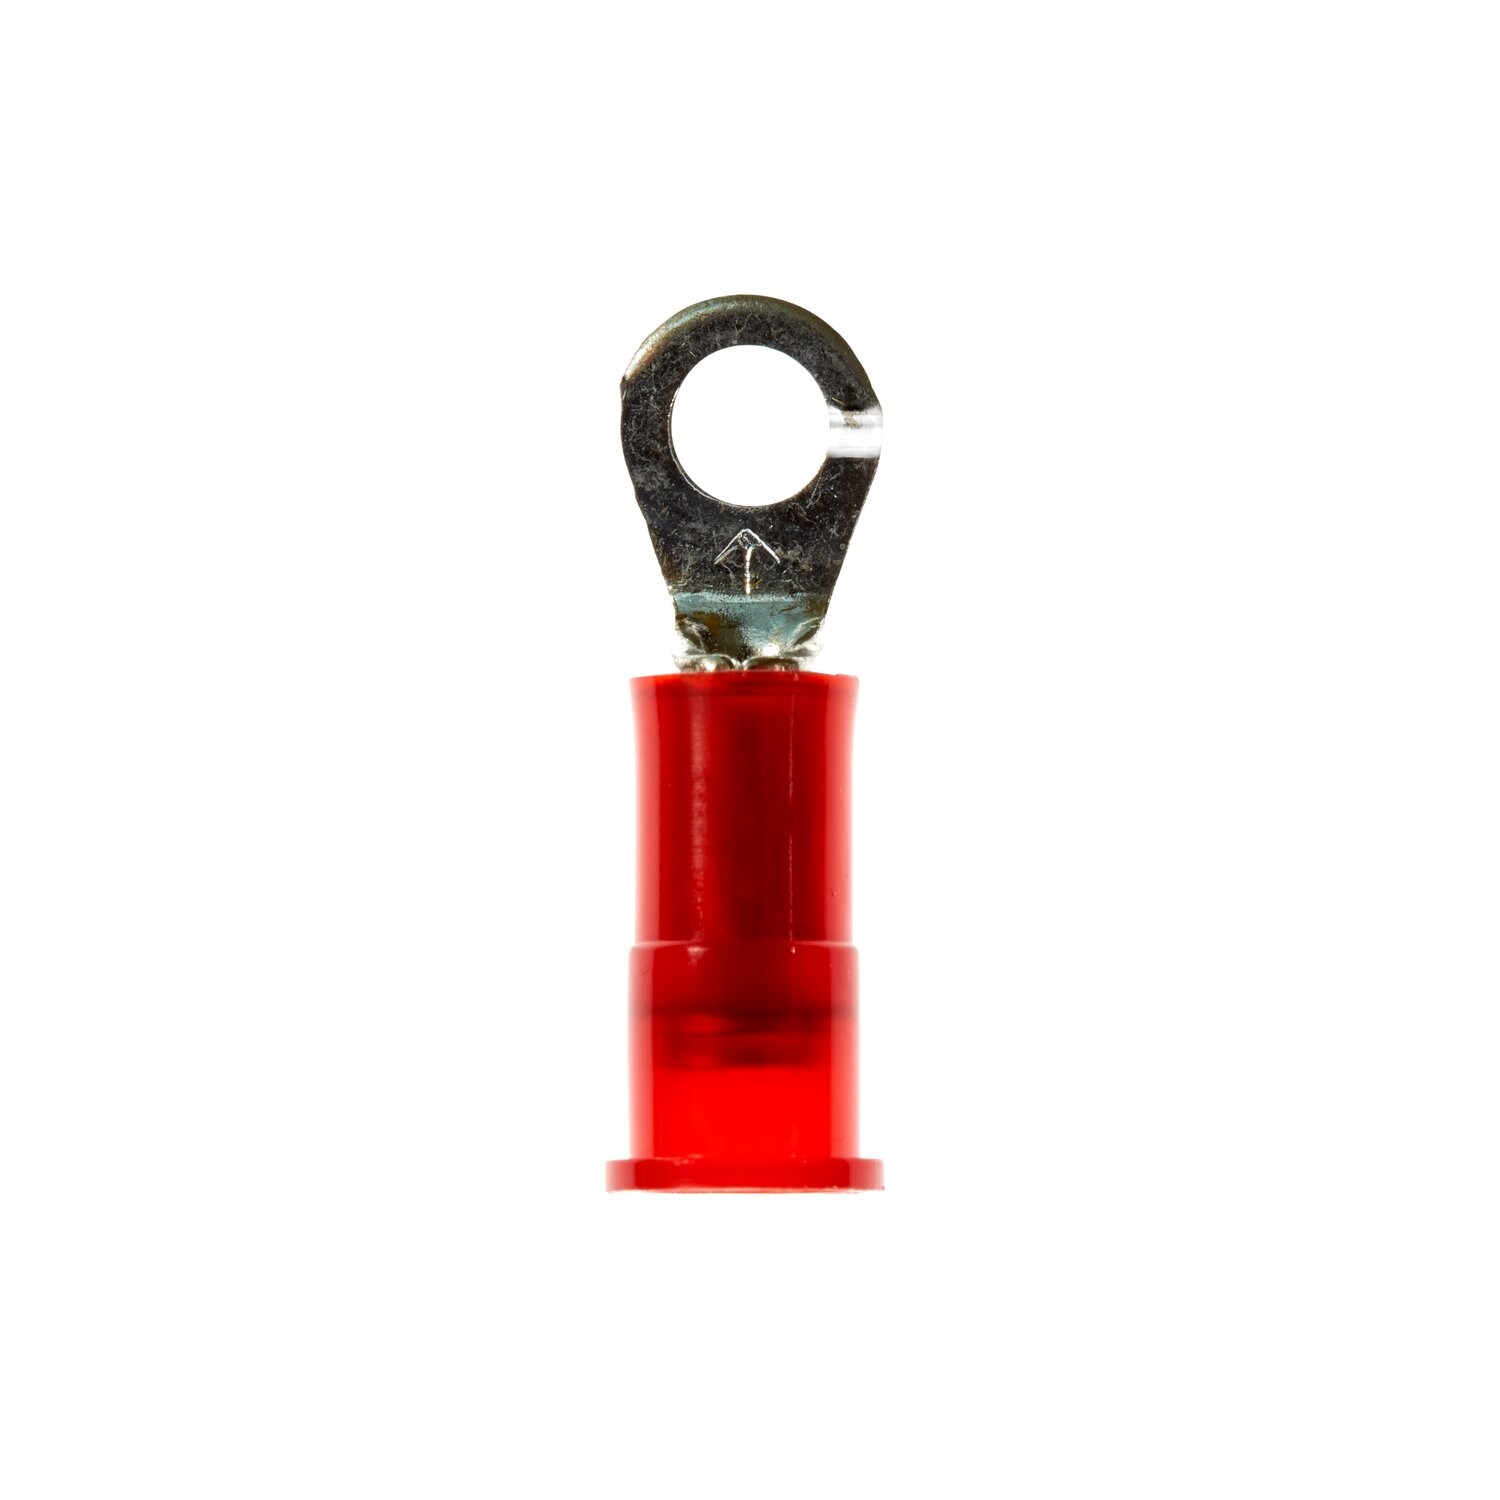 7100163927 - 3M Scotchlok Ring Tongue, Nylon Insulated w/Insulation Grip
MNG18-6R/SK, Stud Size 6, 100/case